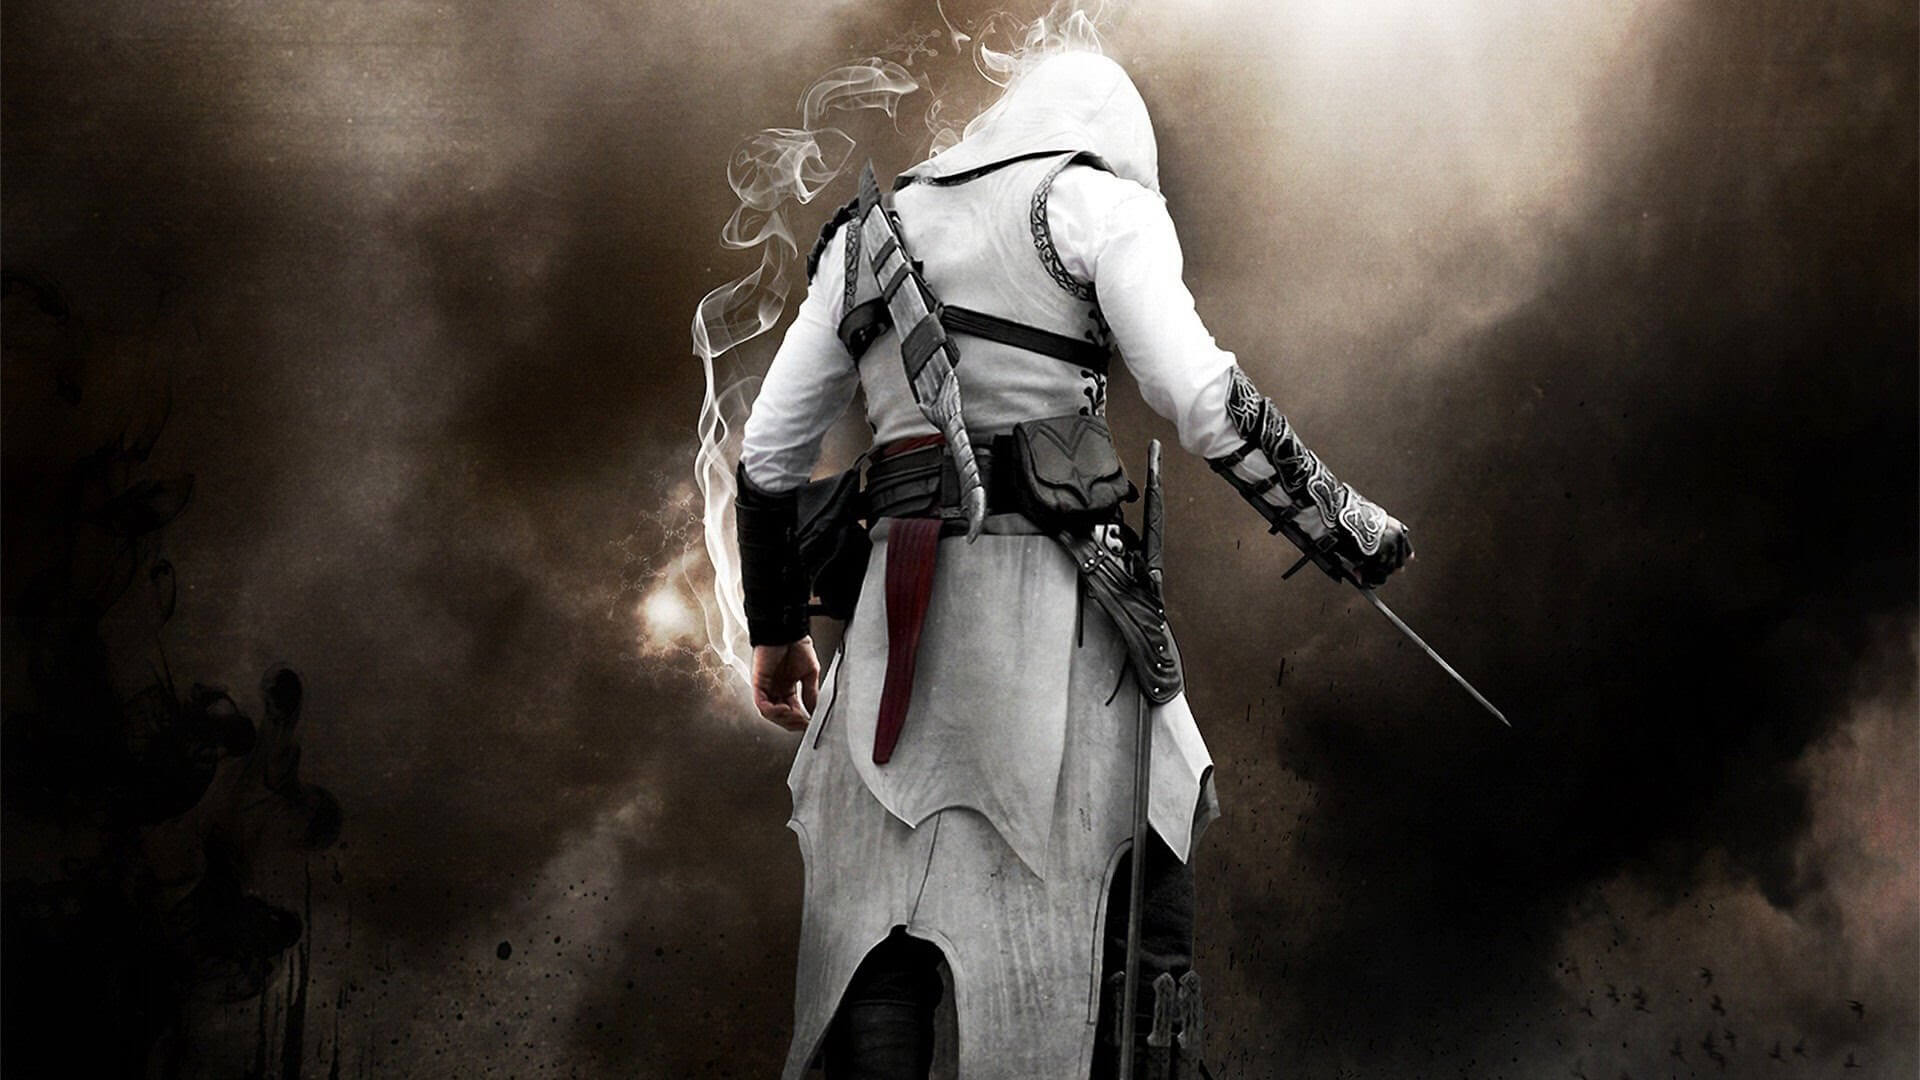 Assassin's Creed Movie Shares Continuity With Games